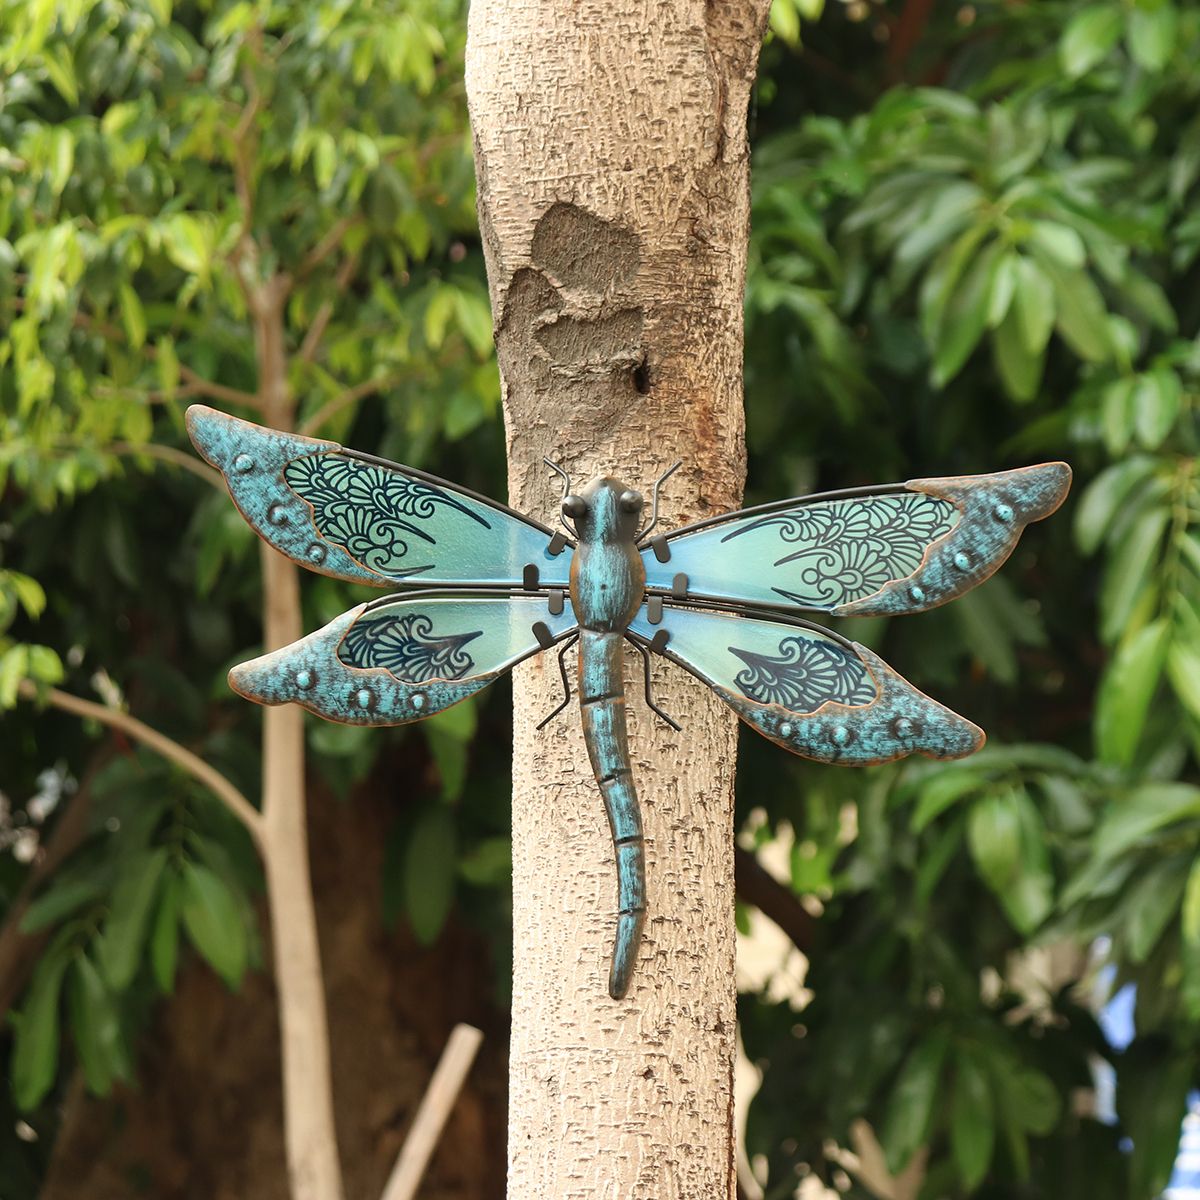 Metal Dragonfly 3d Wall Art Garden Sculpture Decoration Fence Ornaments Intended For Latest Dragonflies Wall Art (View 12 of 20)